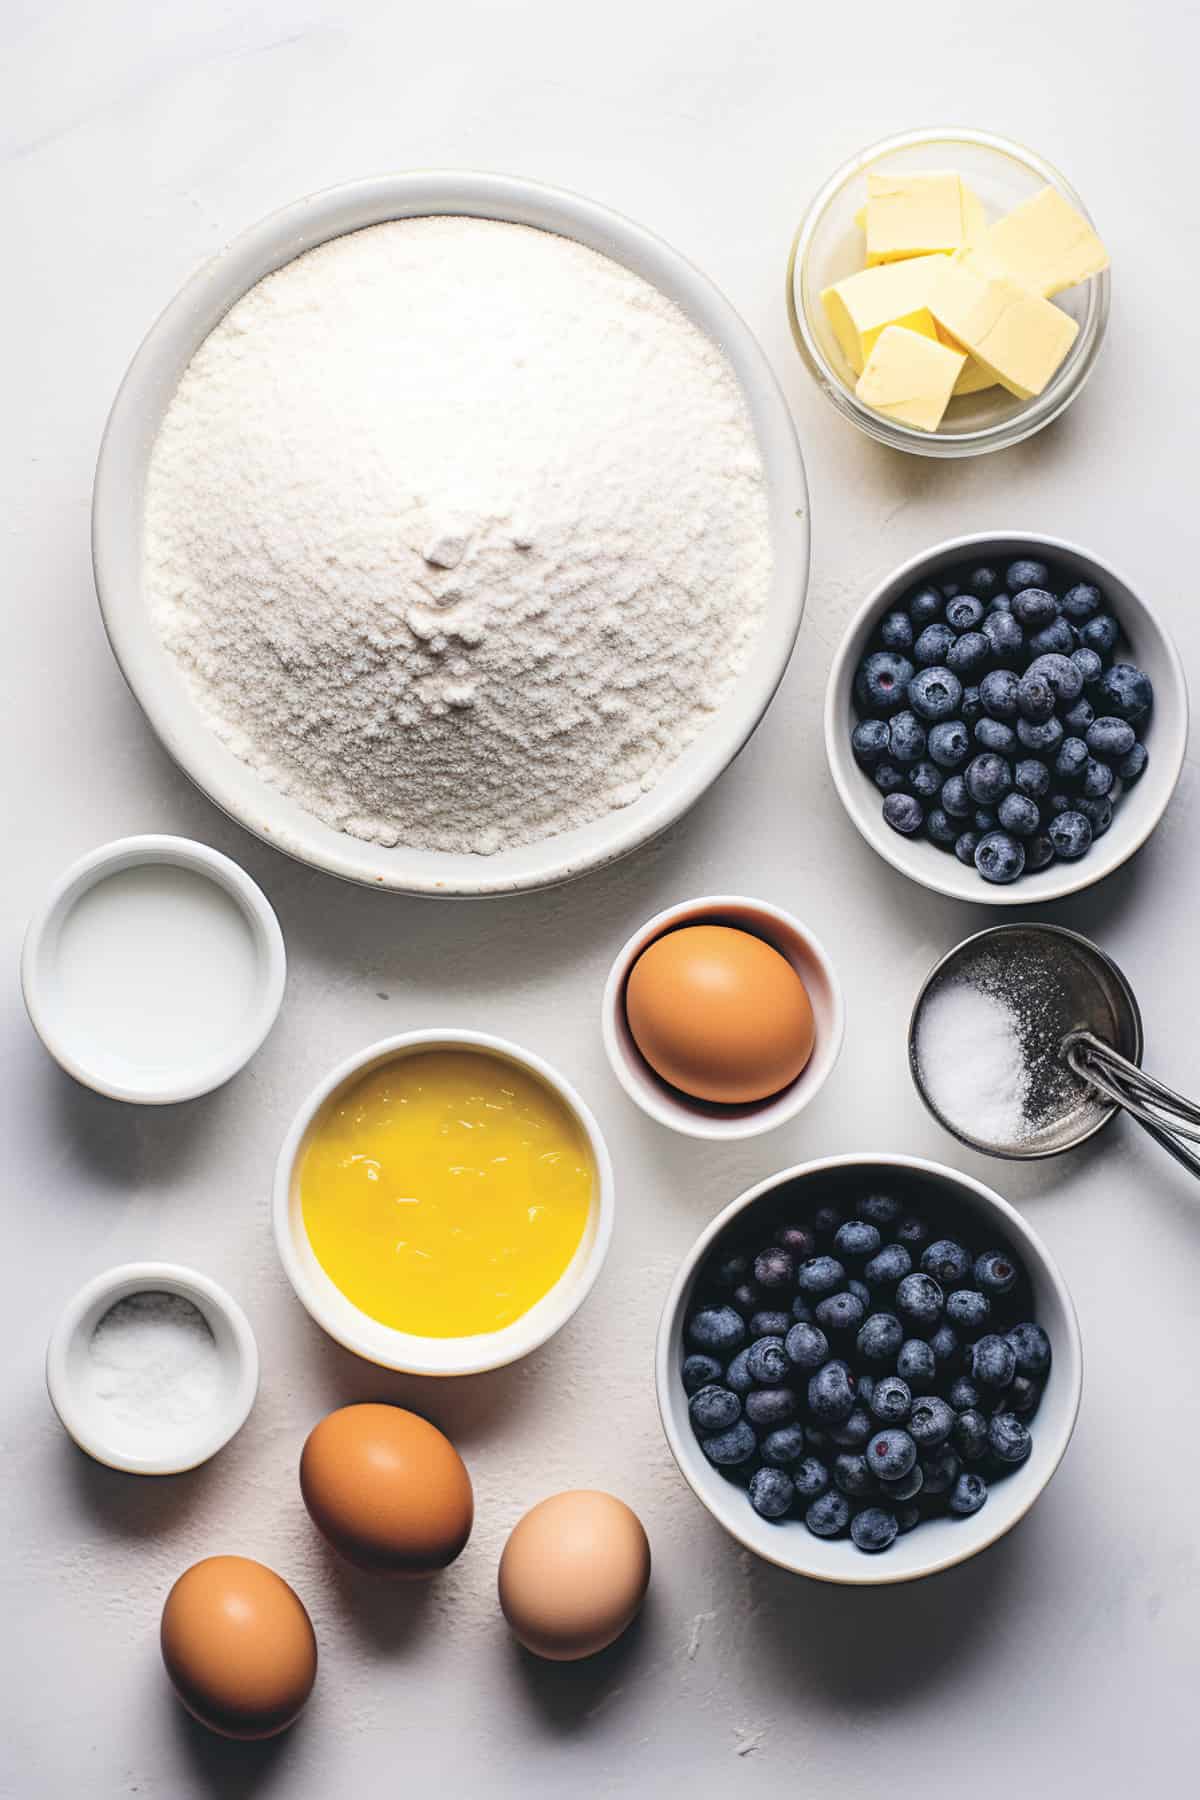 Ingredients for making blueberry curd.